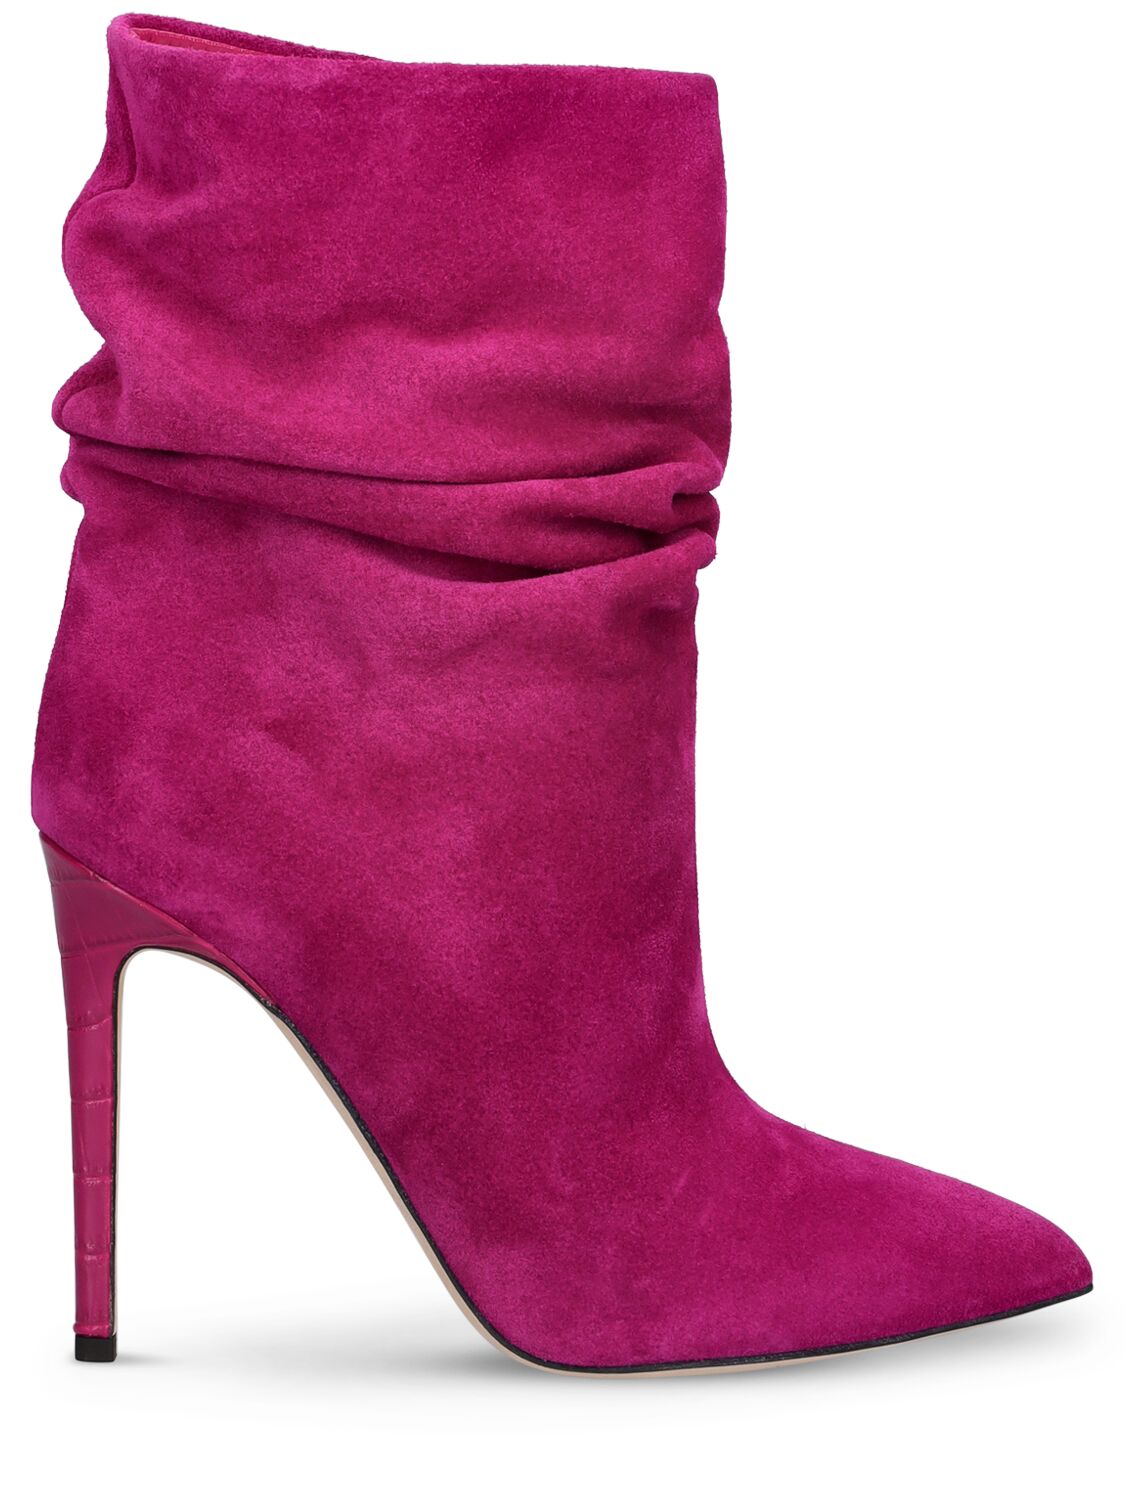 Paris Texas 105mm Slouchy Suede Ankle Boots In Fuchsia